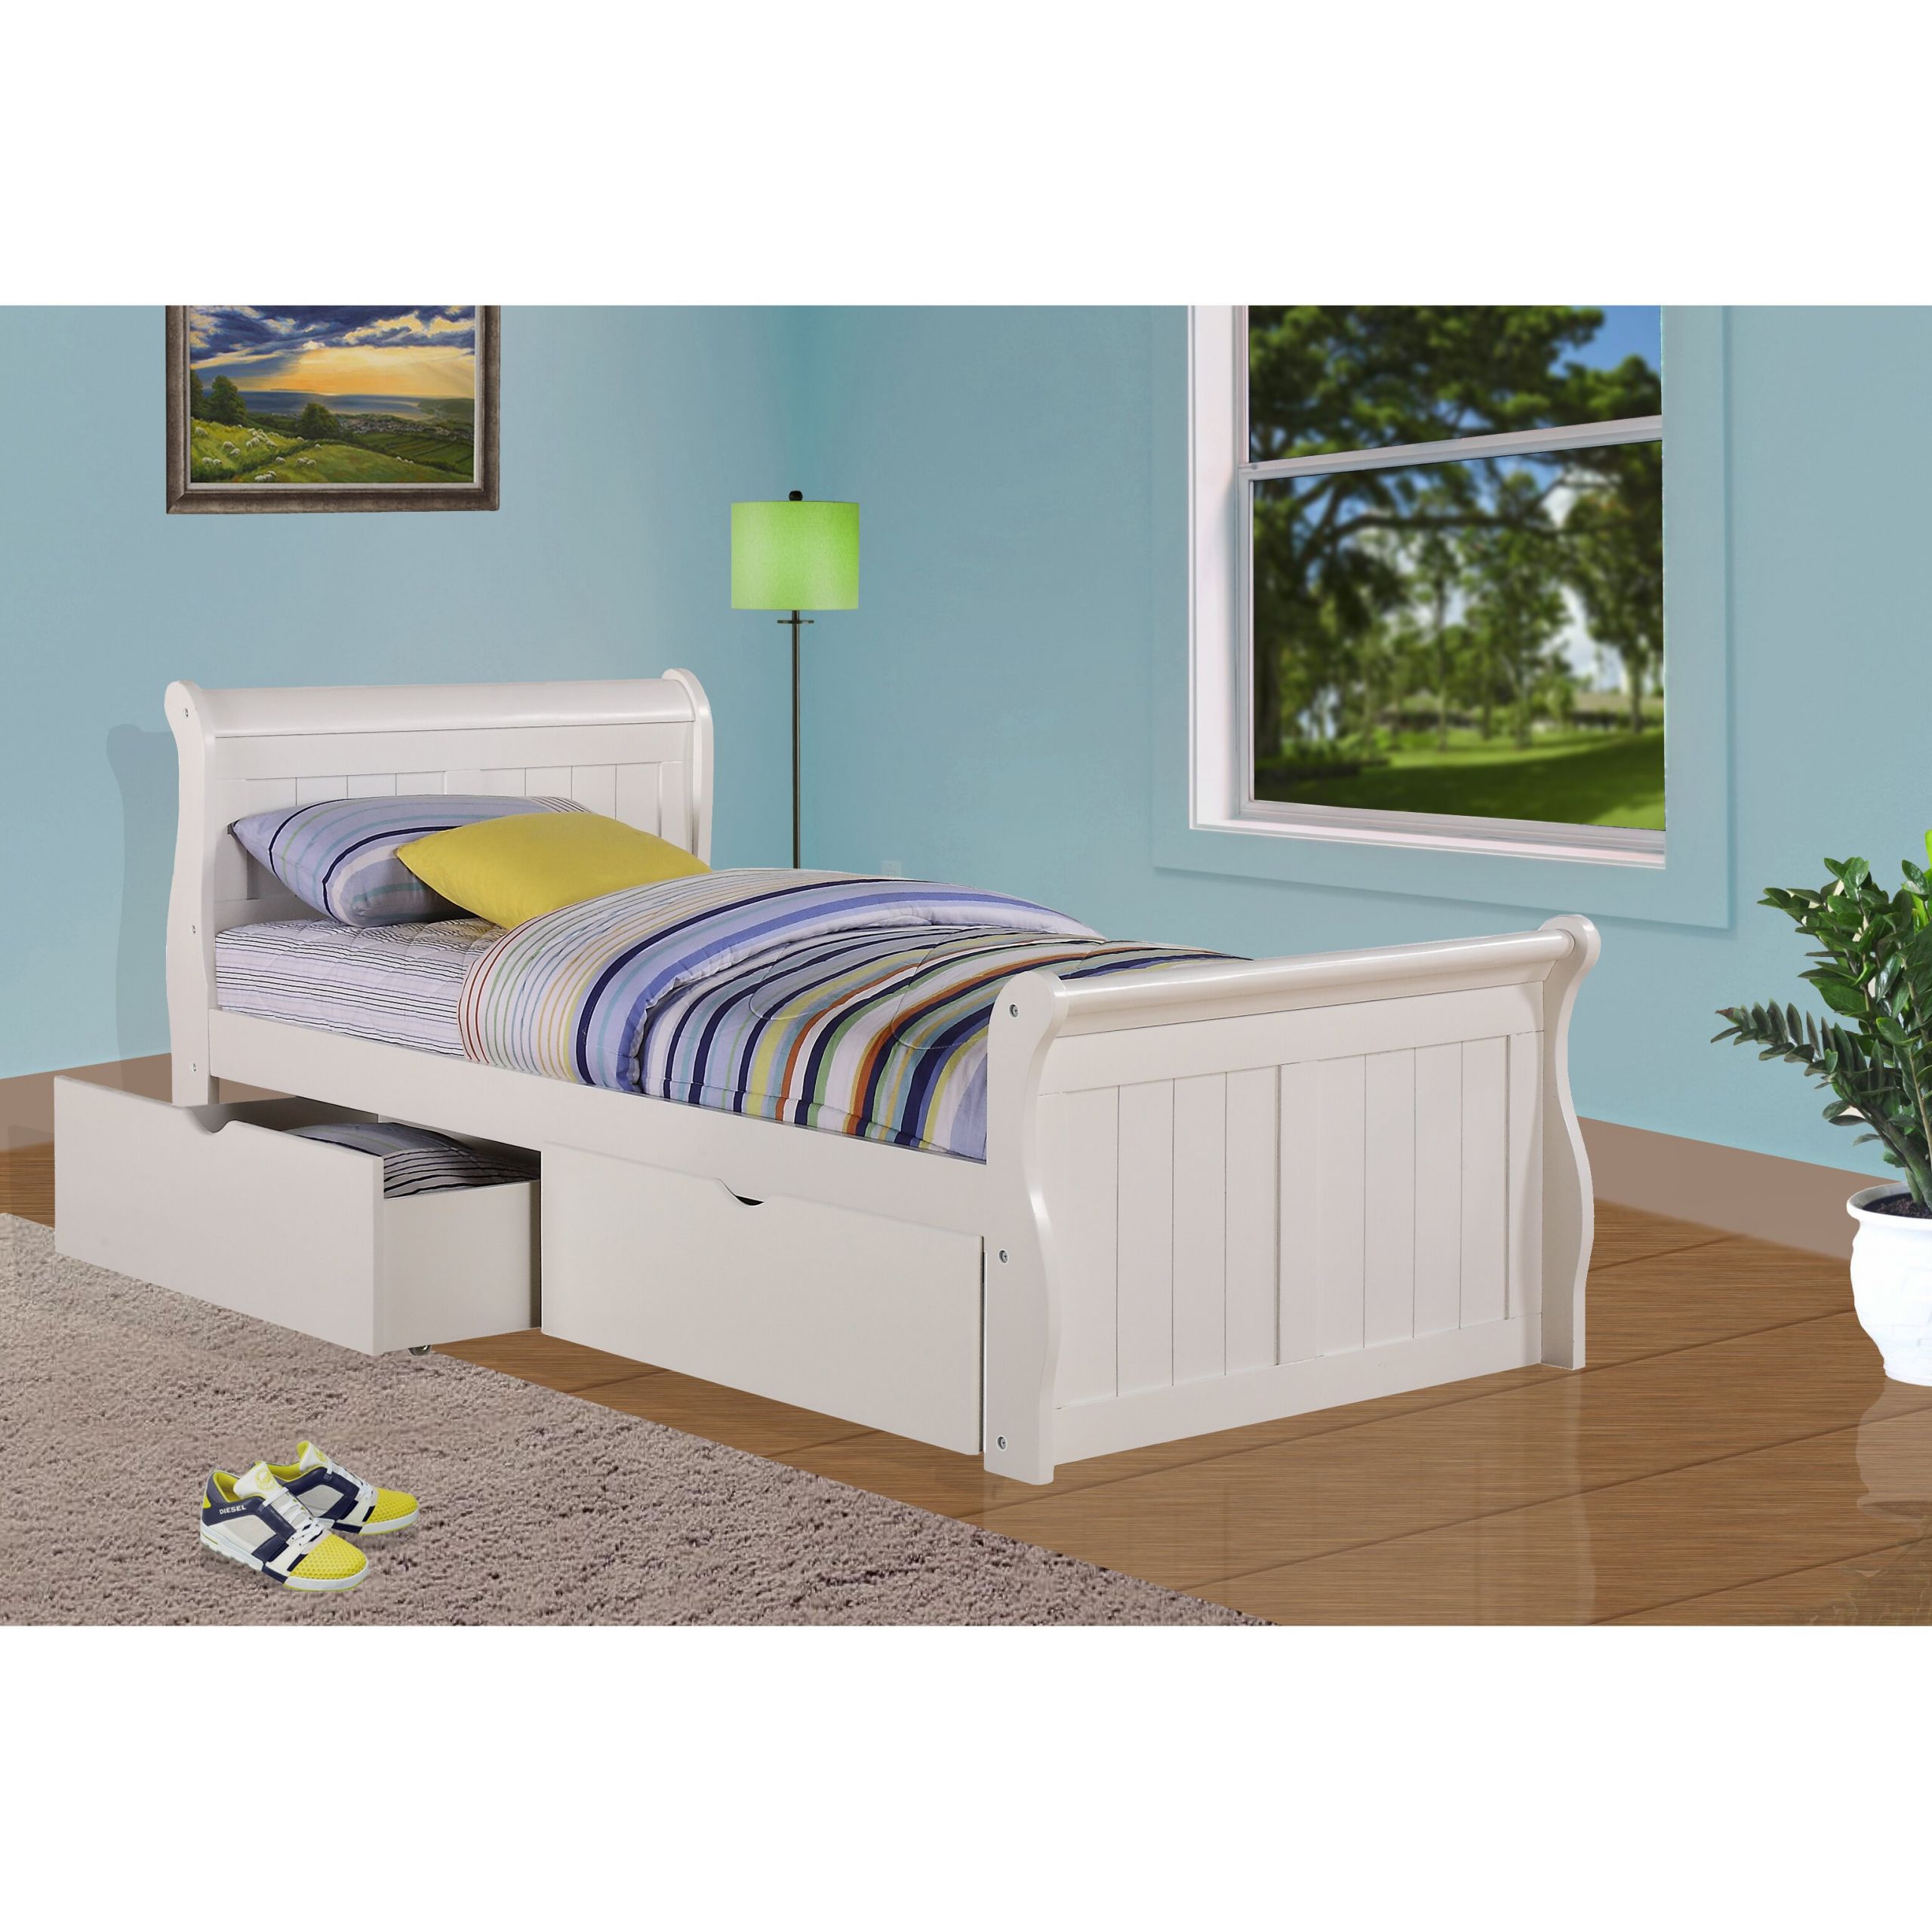 Child Bed With Storage
 Donco Kids Sleigh Bed with Storage & Reviews